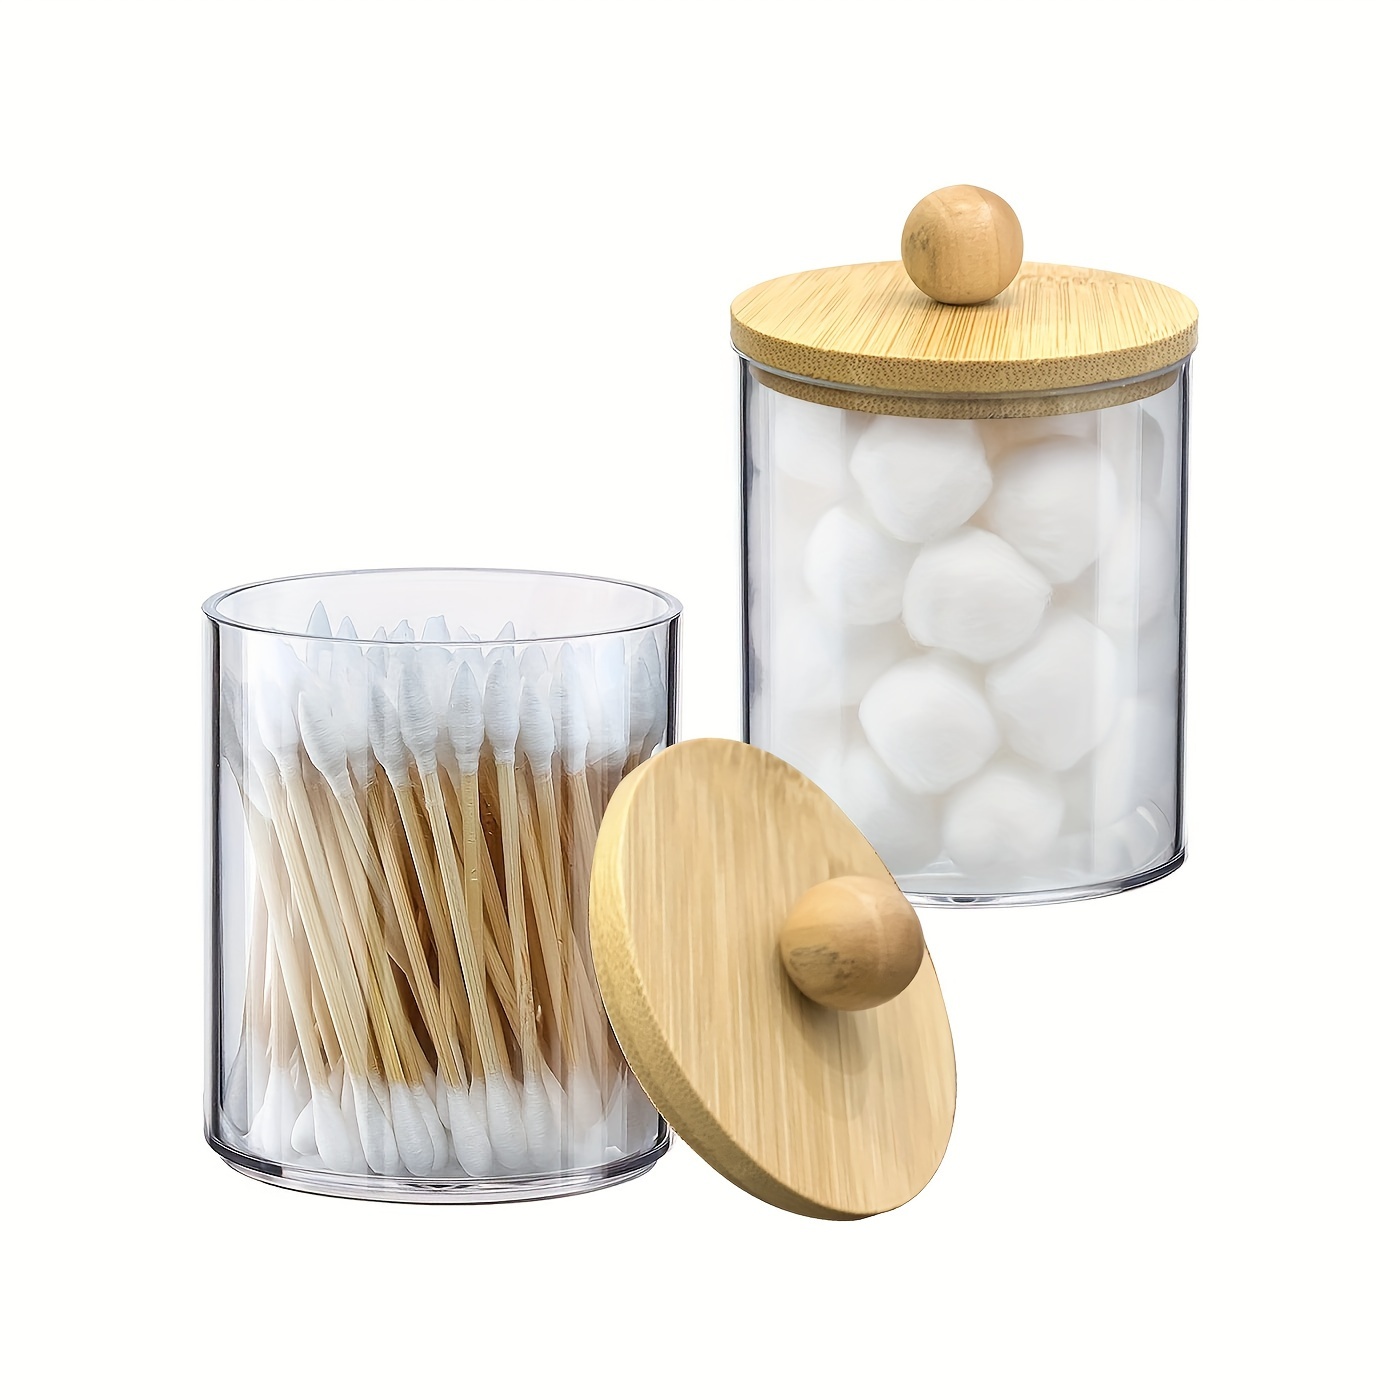 2pcs Apothecary Jars Bathroom Storage Organizer, Cute Qtip Dispenser  Holder, Vanity Canister Jar Glass With Lid For Cotton Swabs, Makeup Sponge  Hair A